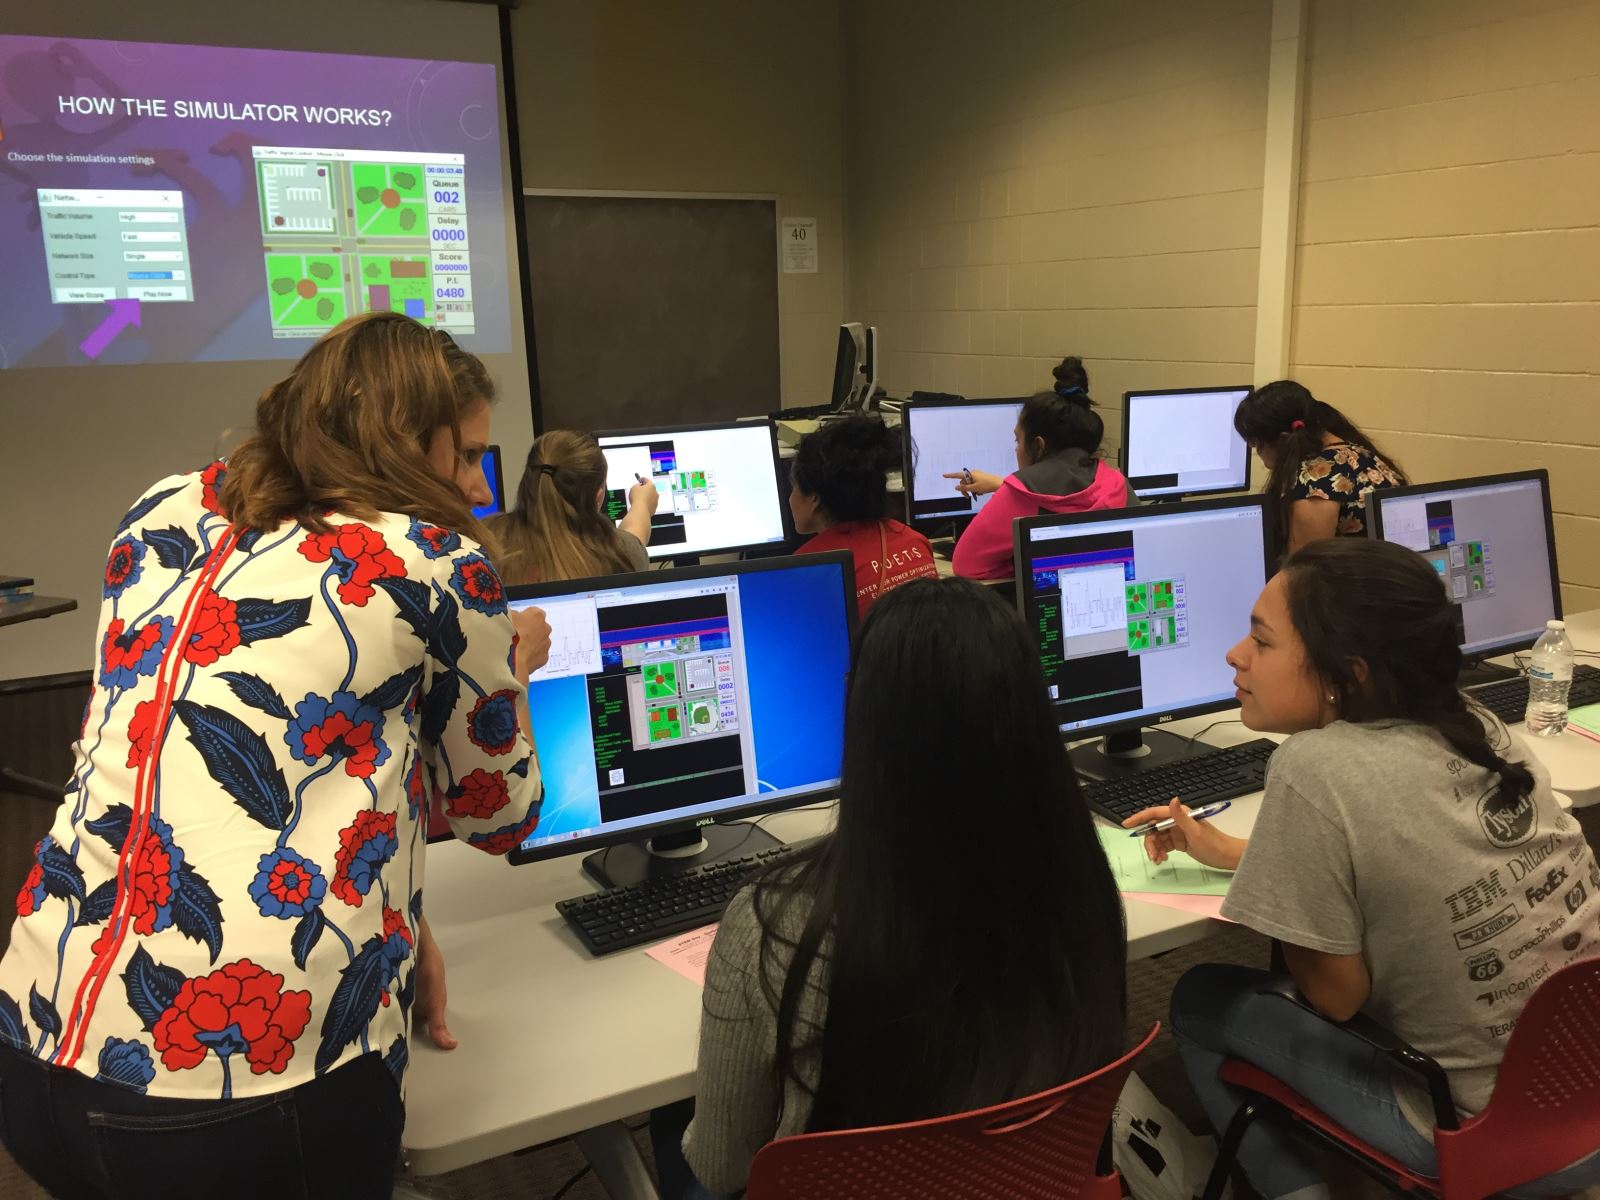 Dr. Hernandez uses active learning methods with traffic simulation to engage students in STEM outreach programs